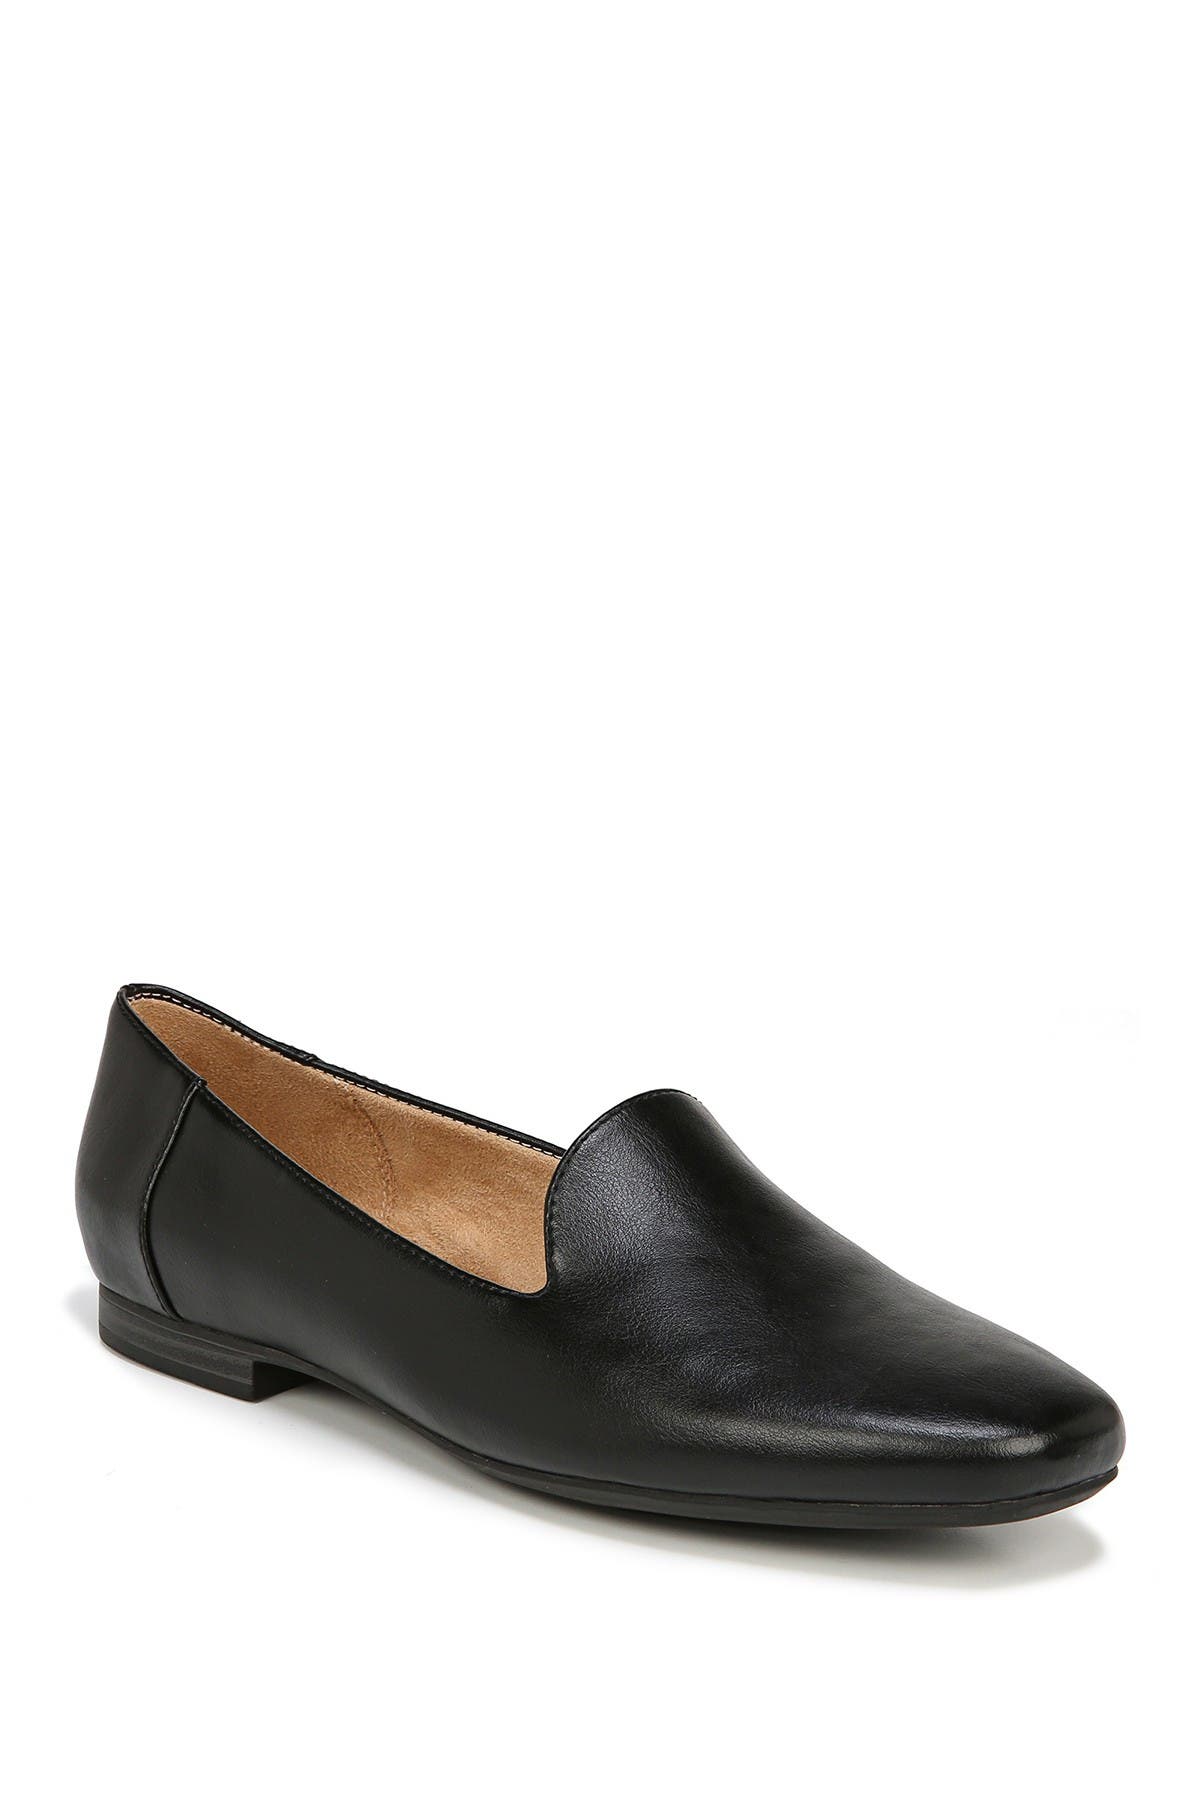 Naturalizer | Kit Faux Leather Loafer 